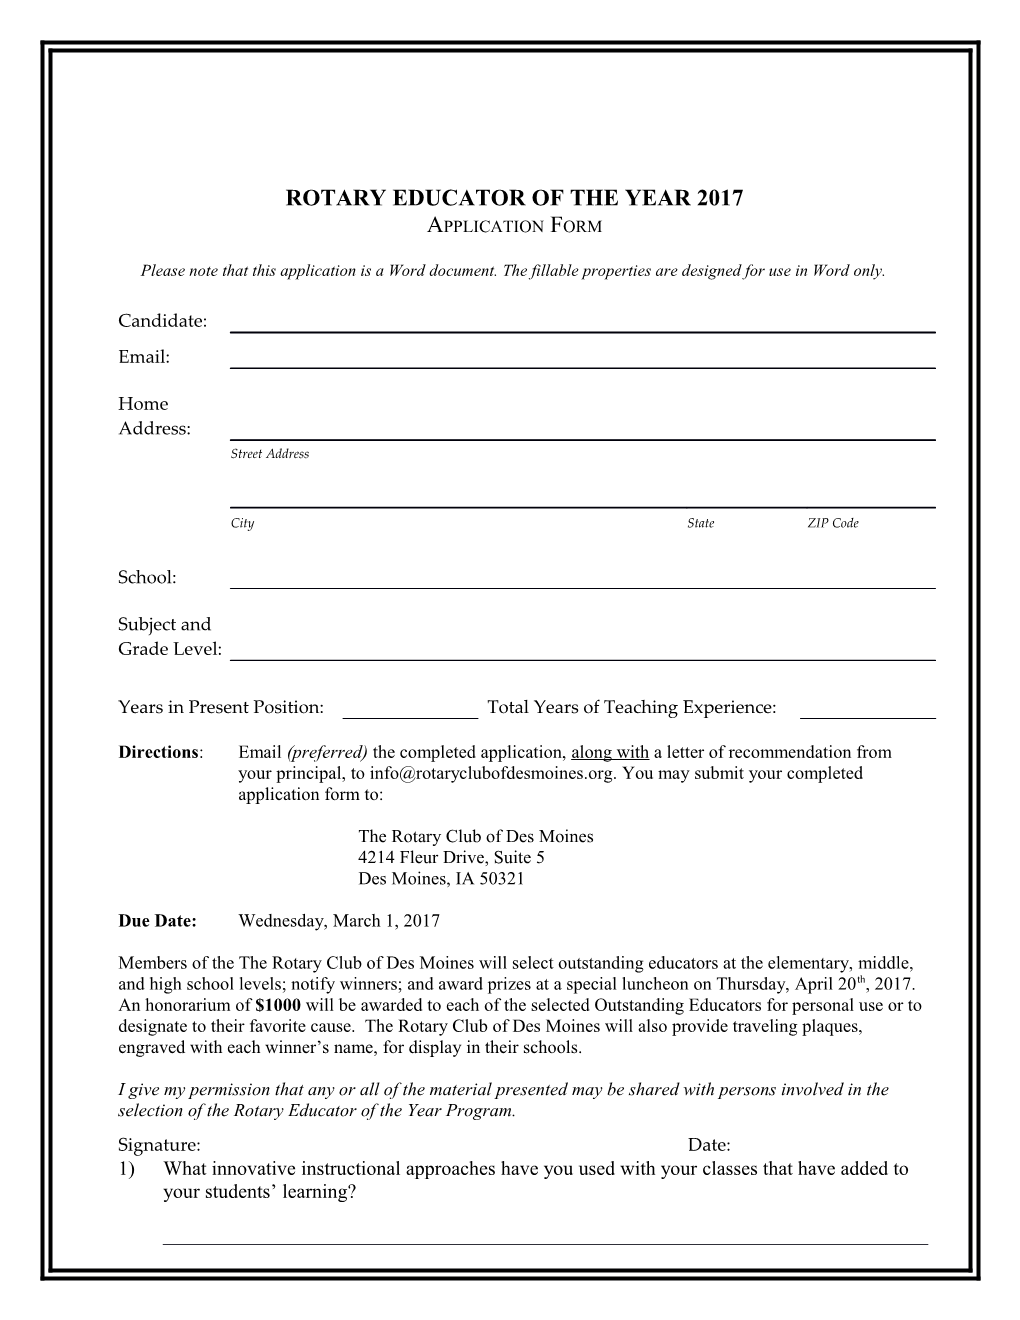 Rotary Educator of the Year 2017 Application Form